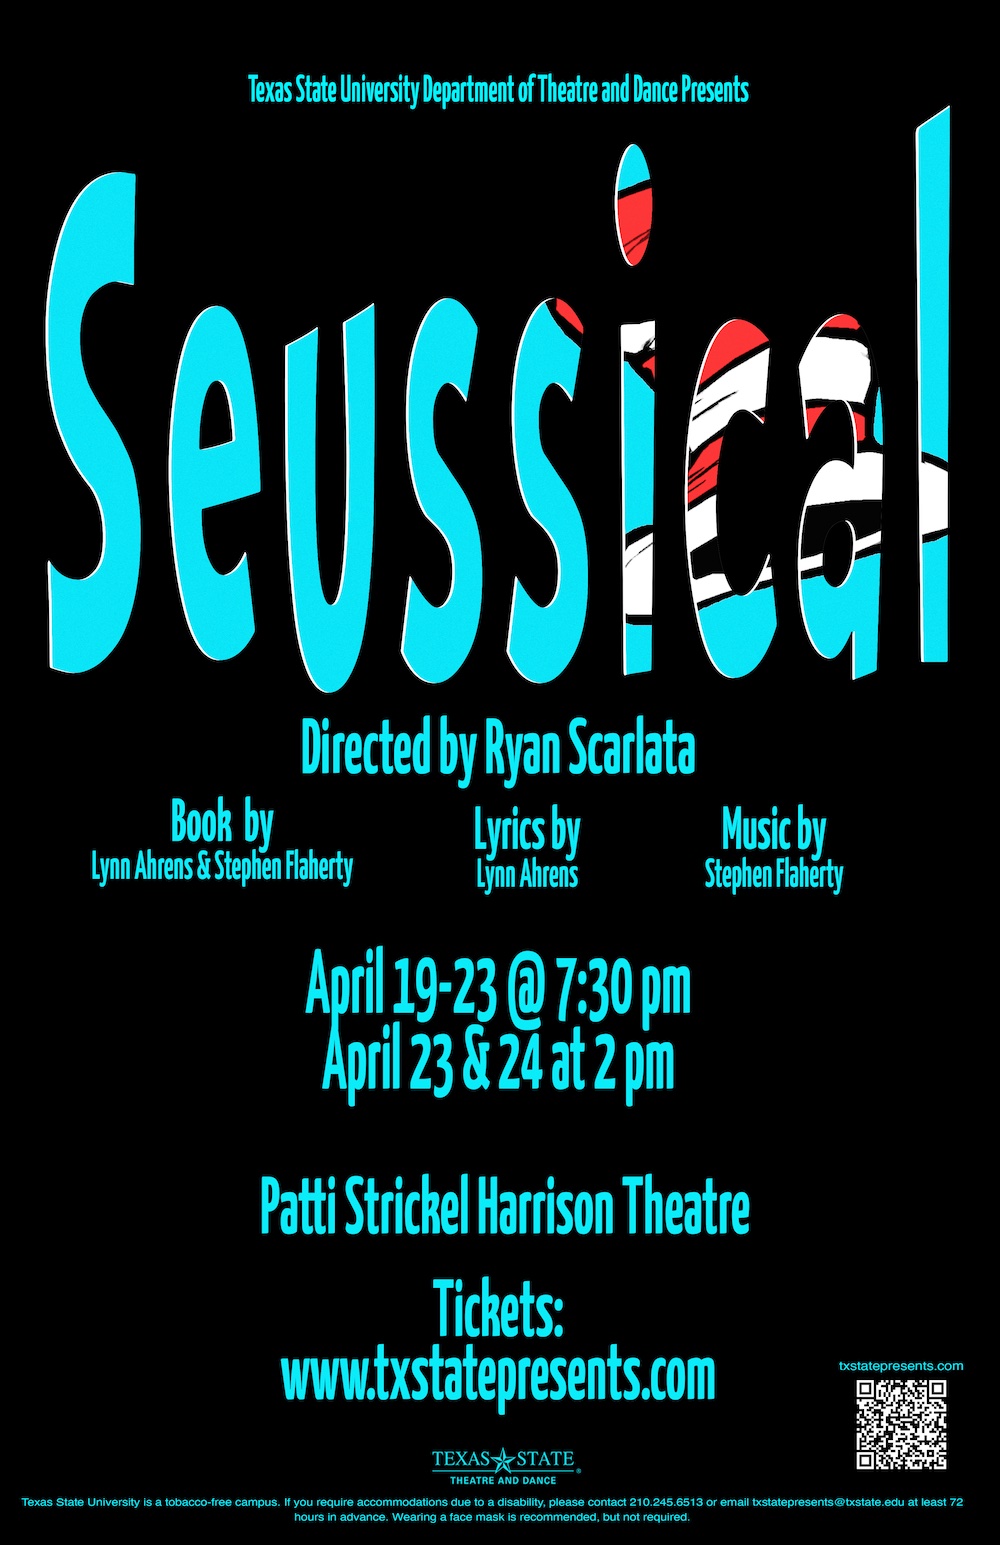 Seussical, the musical by Texas State University